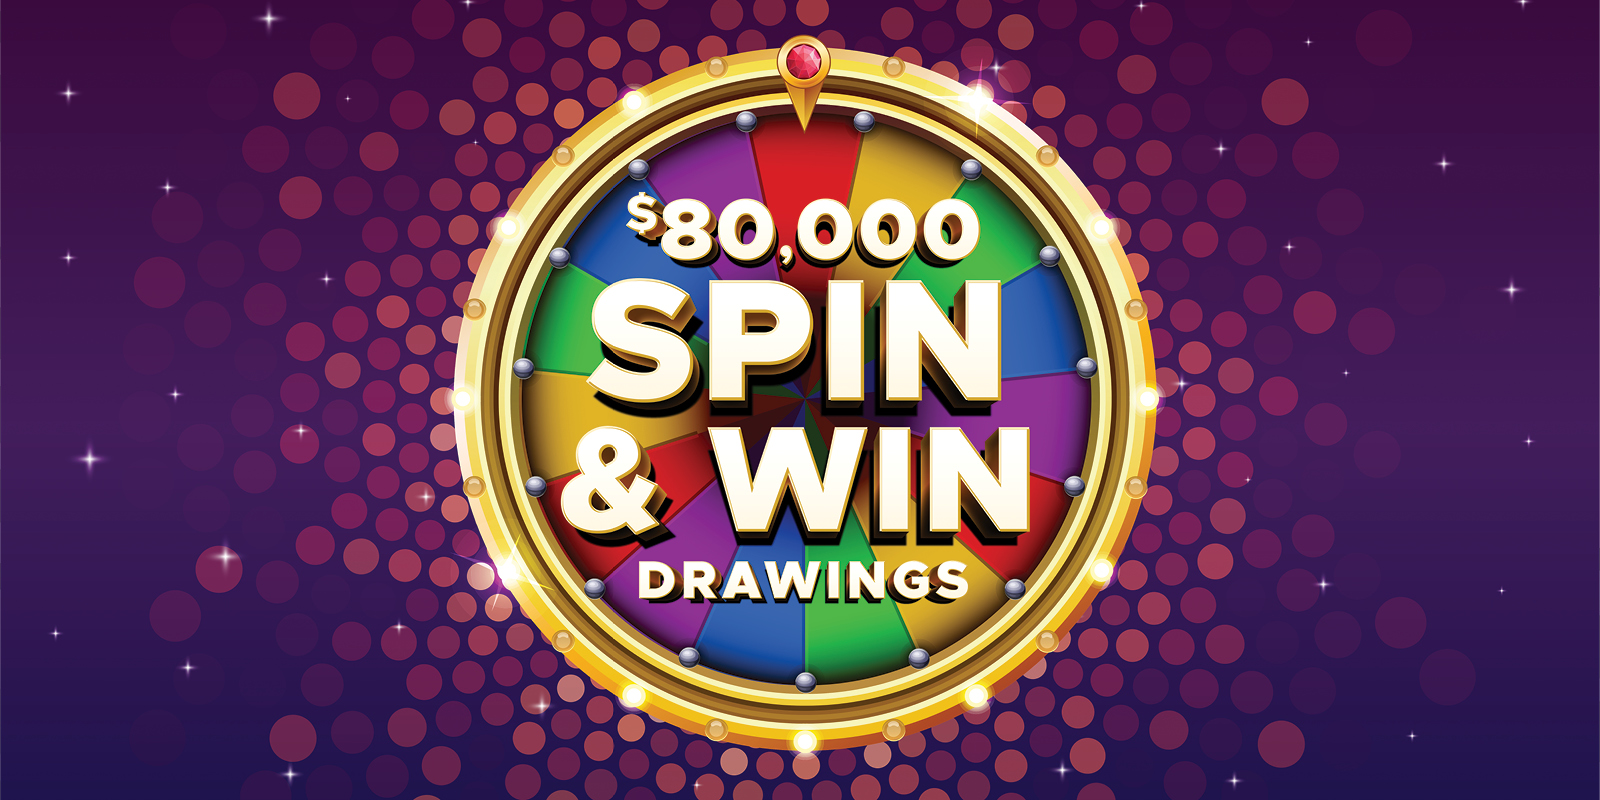 spin and win drawings creative showing a wheel and a game show vibe